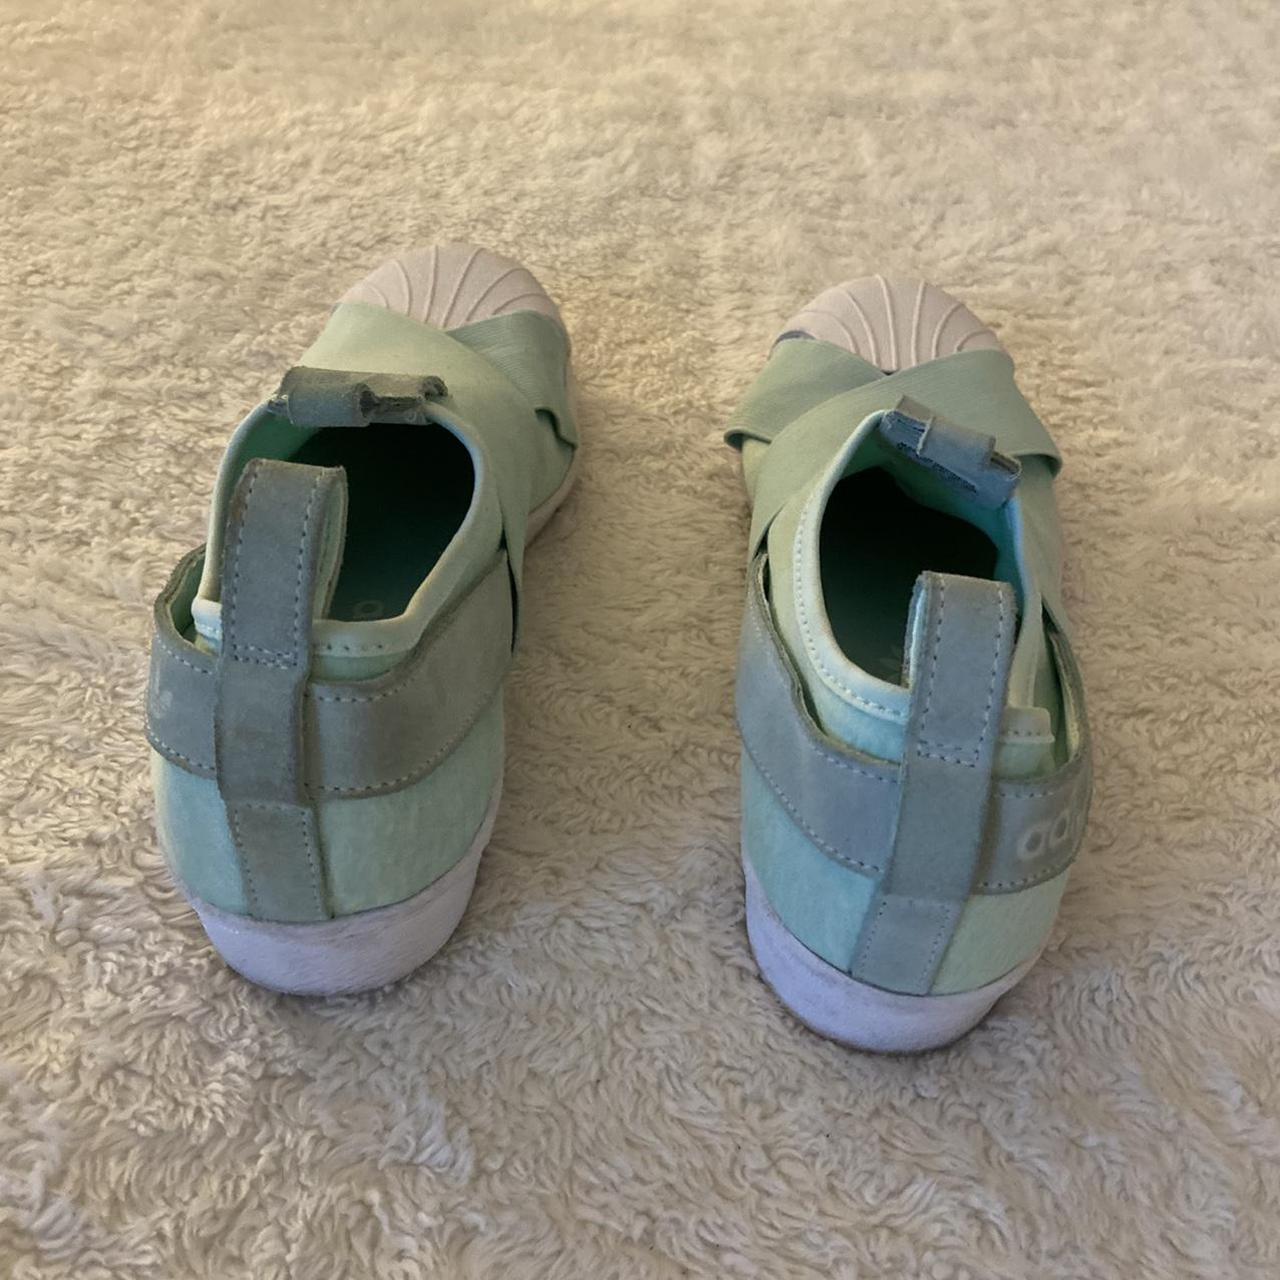 Product Image 4 - Turquoise Adidas Sneaker Shoes

Size 8